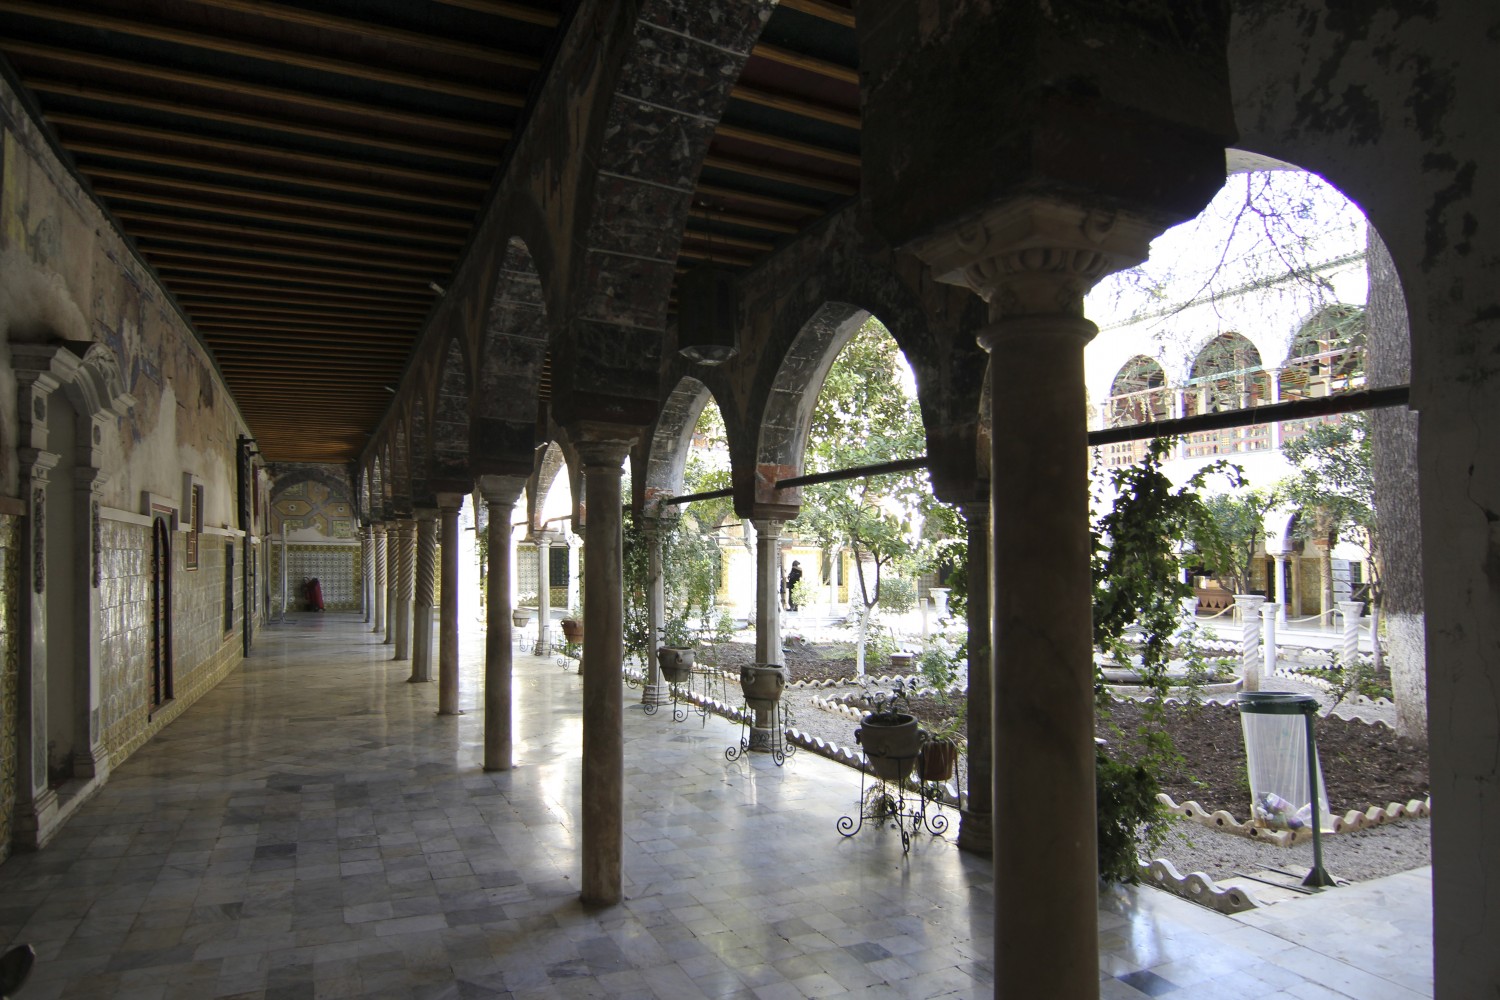 Orange trees garden, view of west double gallery showing slender columns with entasis 